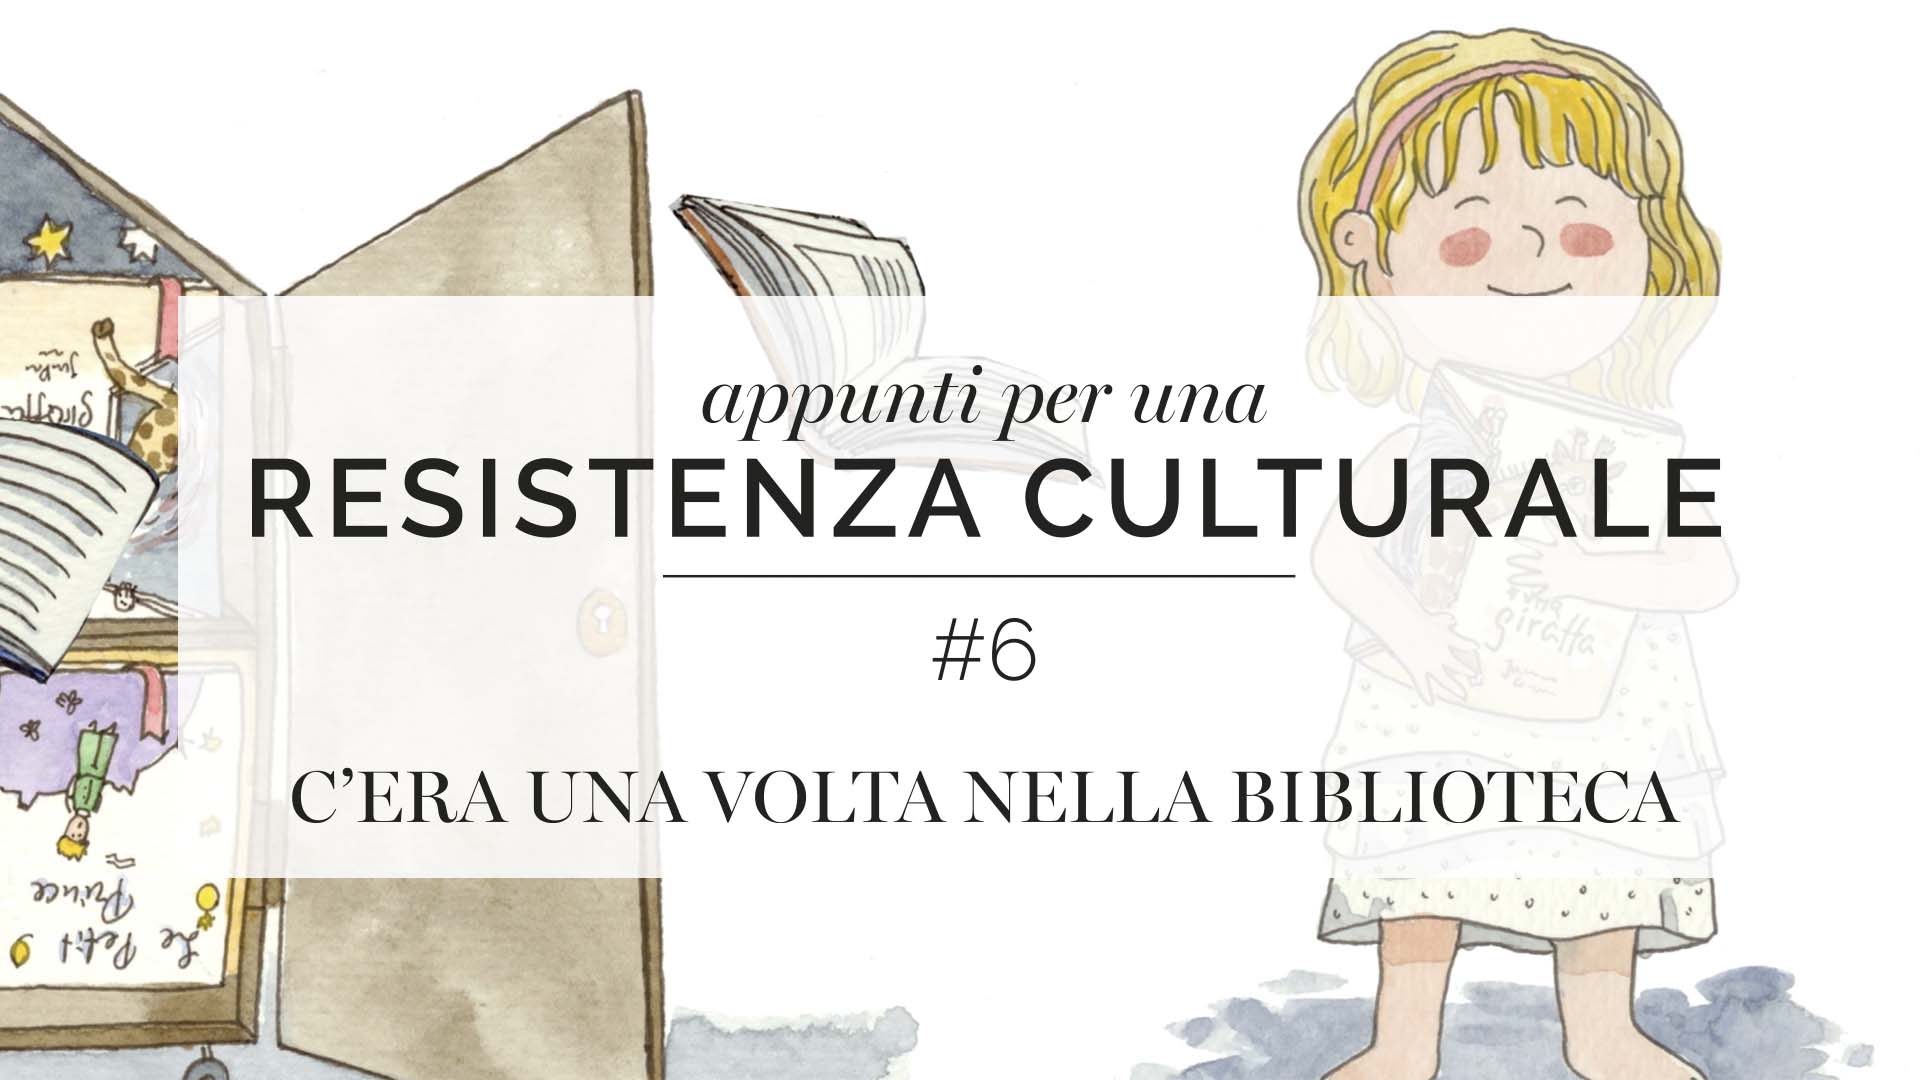 Appunti per una resistenza culturale #6<br>Once upon a time in the library